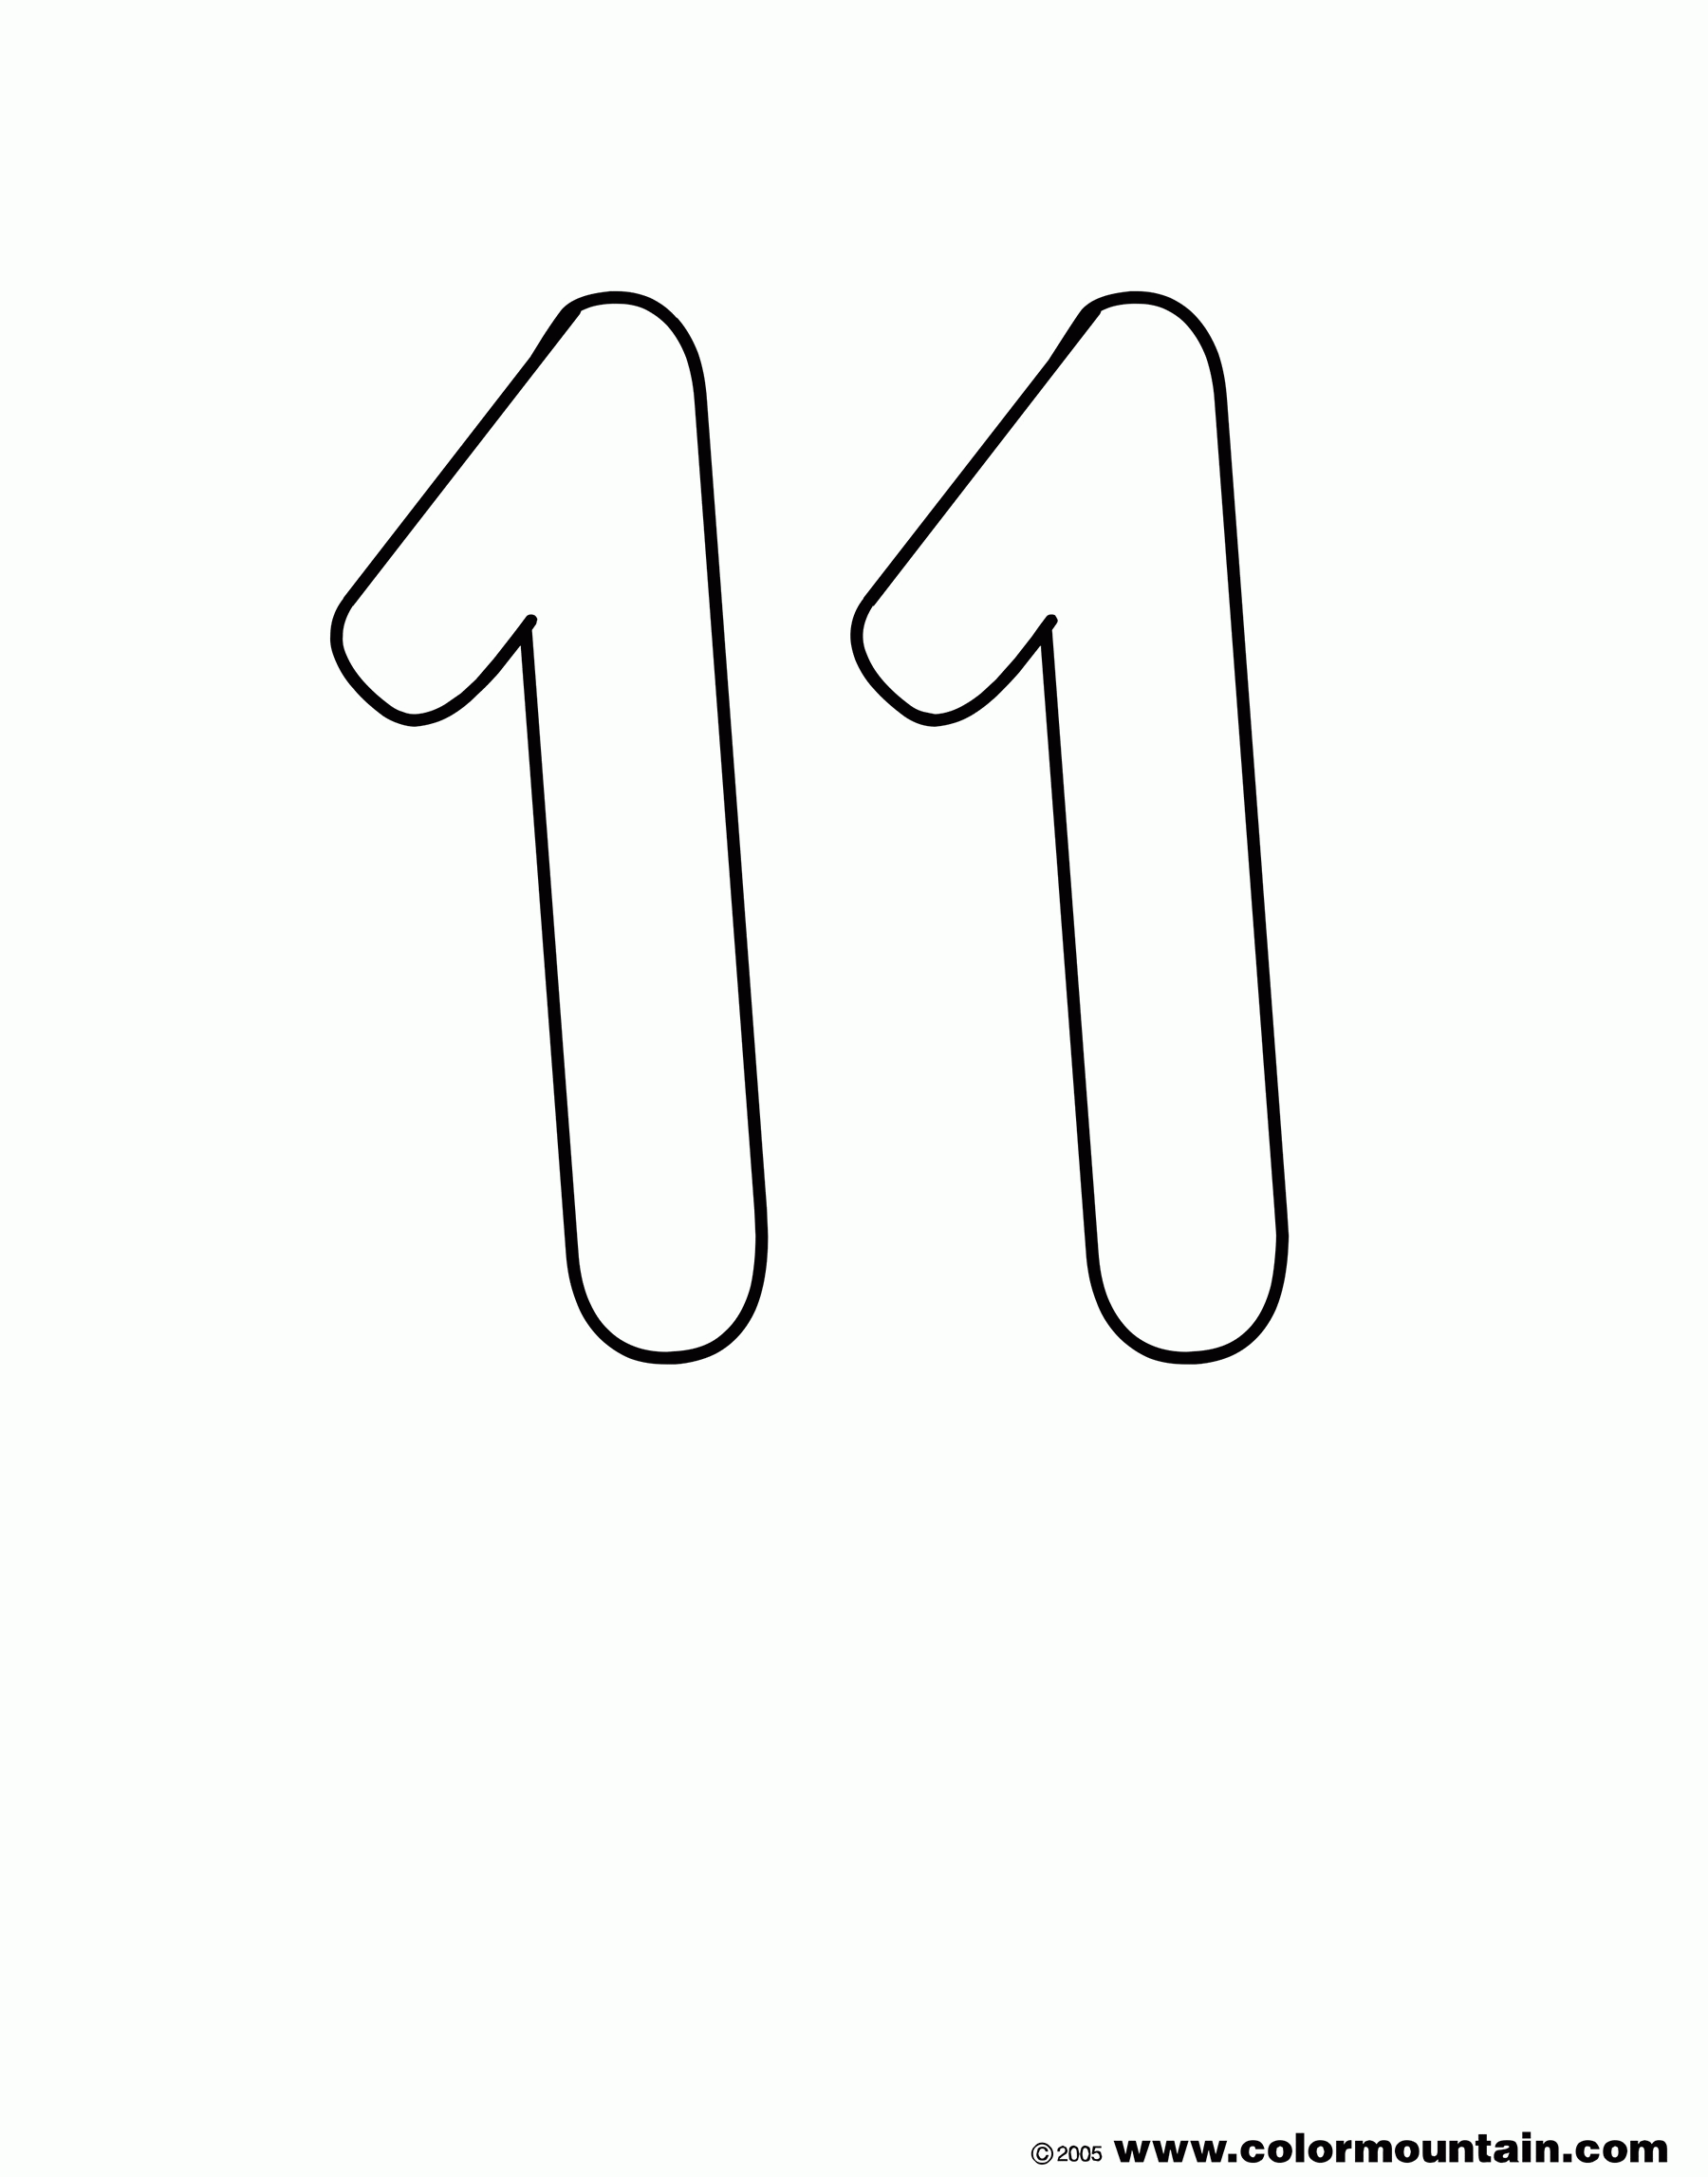 Number 11 Coloring Page